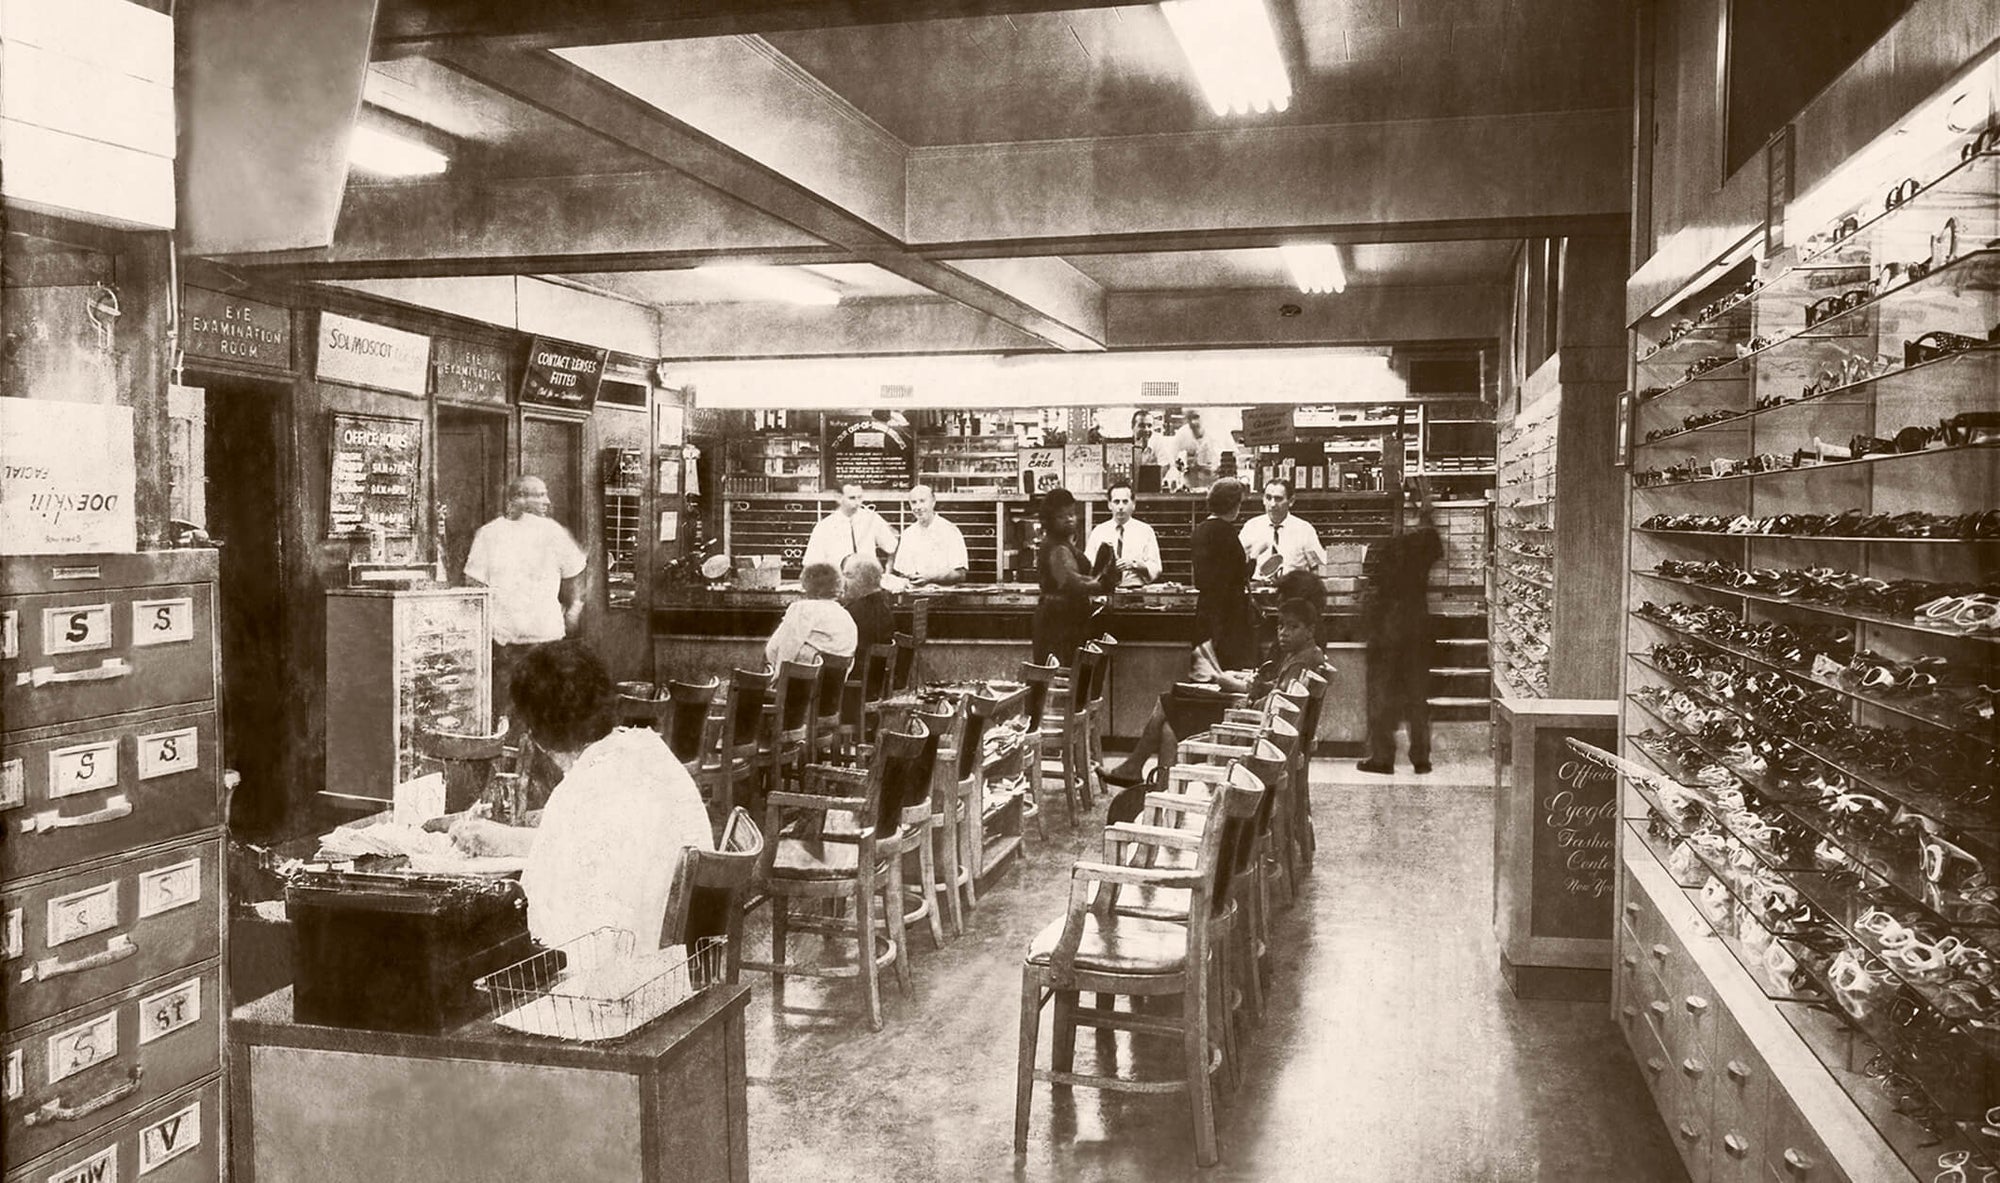 Old photo of the inside of Moscot store